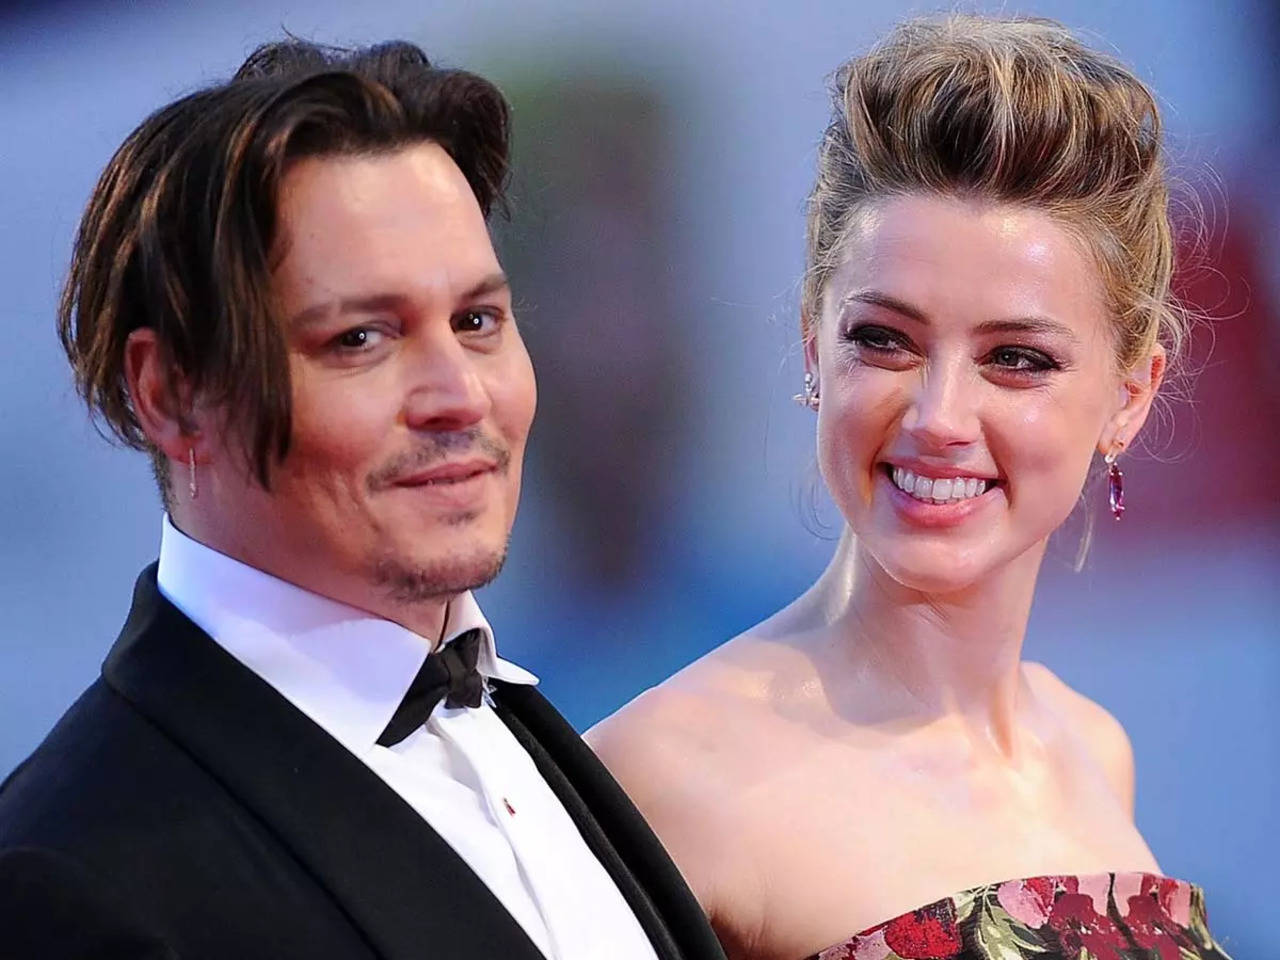 Johnny Depp was aware that Amber Heard was sexually involved with Hollywood directors to get movie roles English Movie News